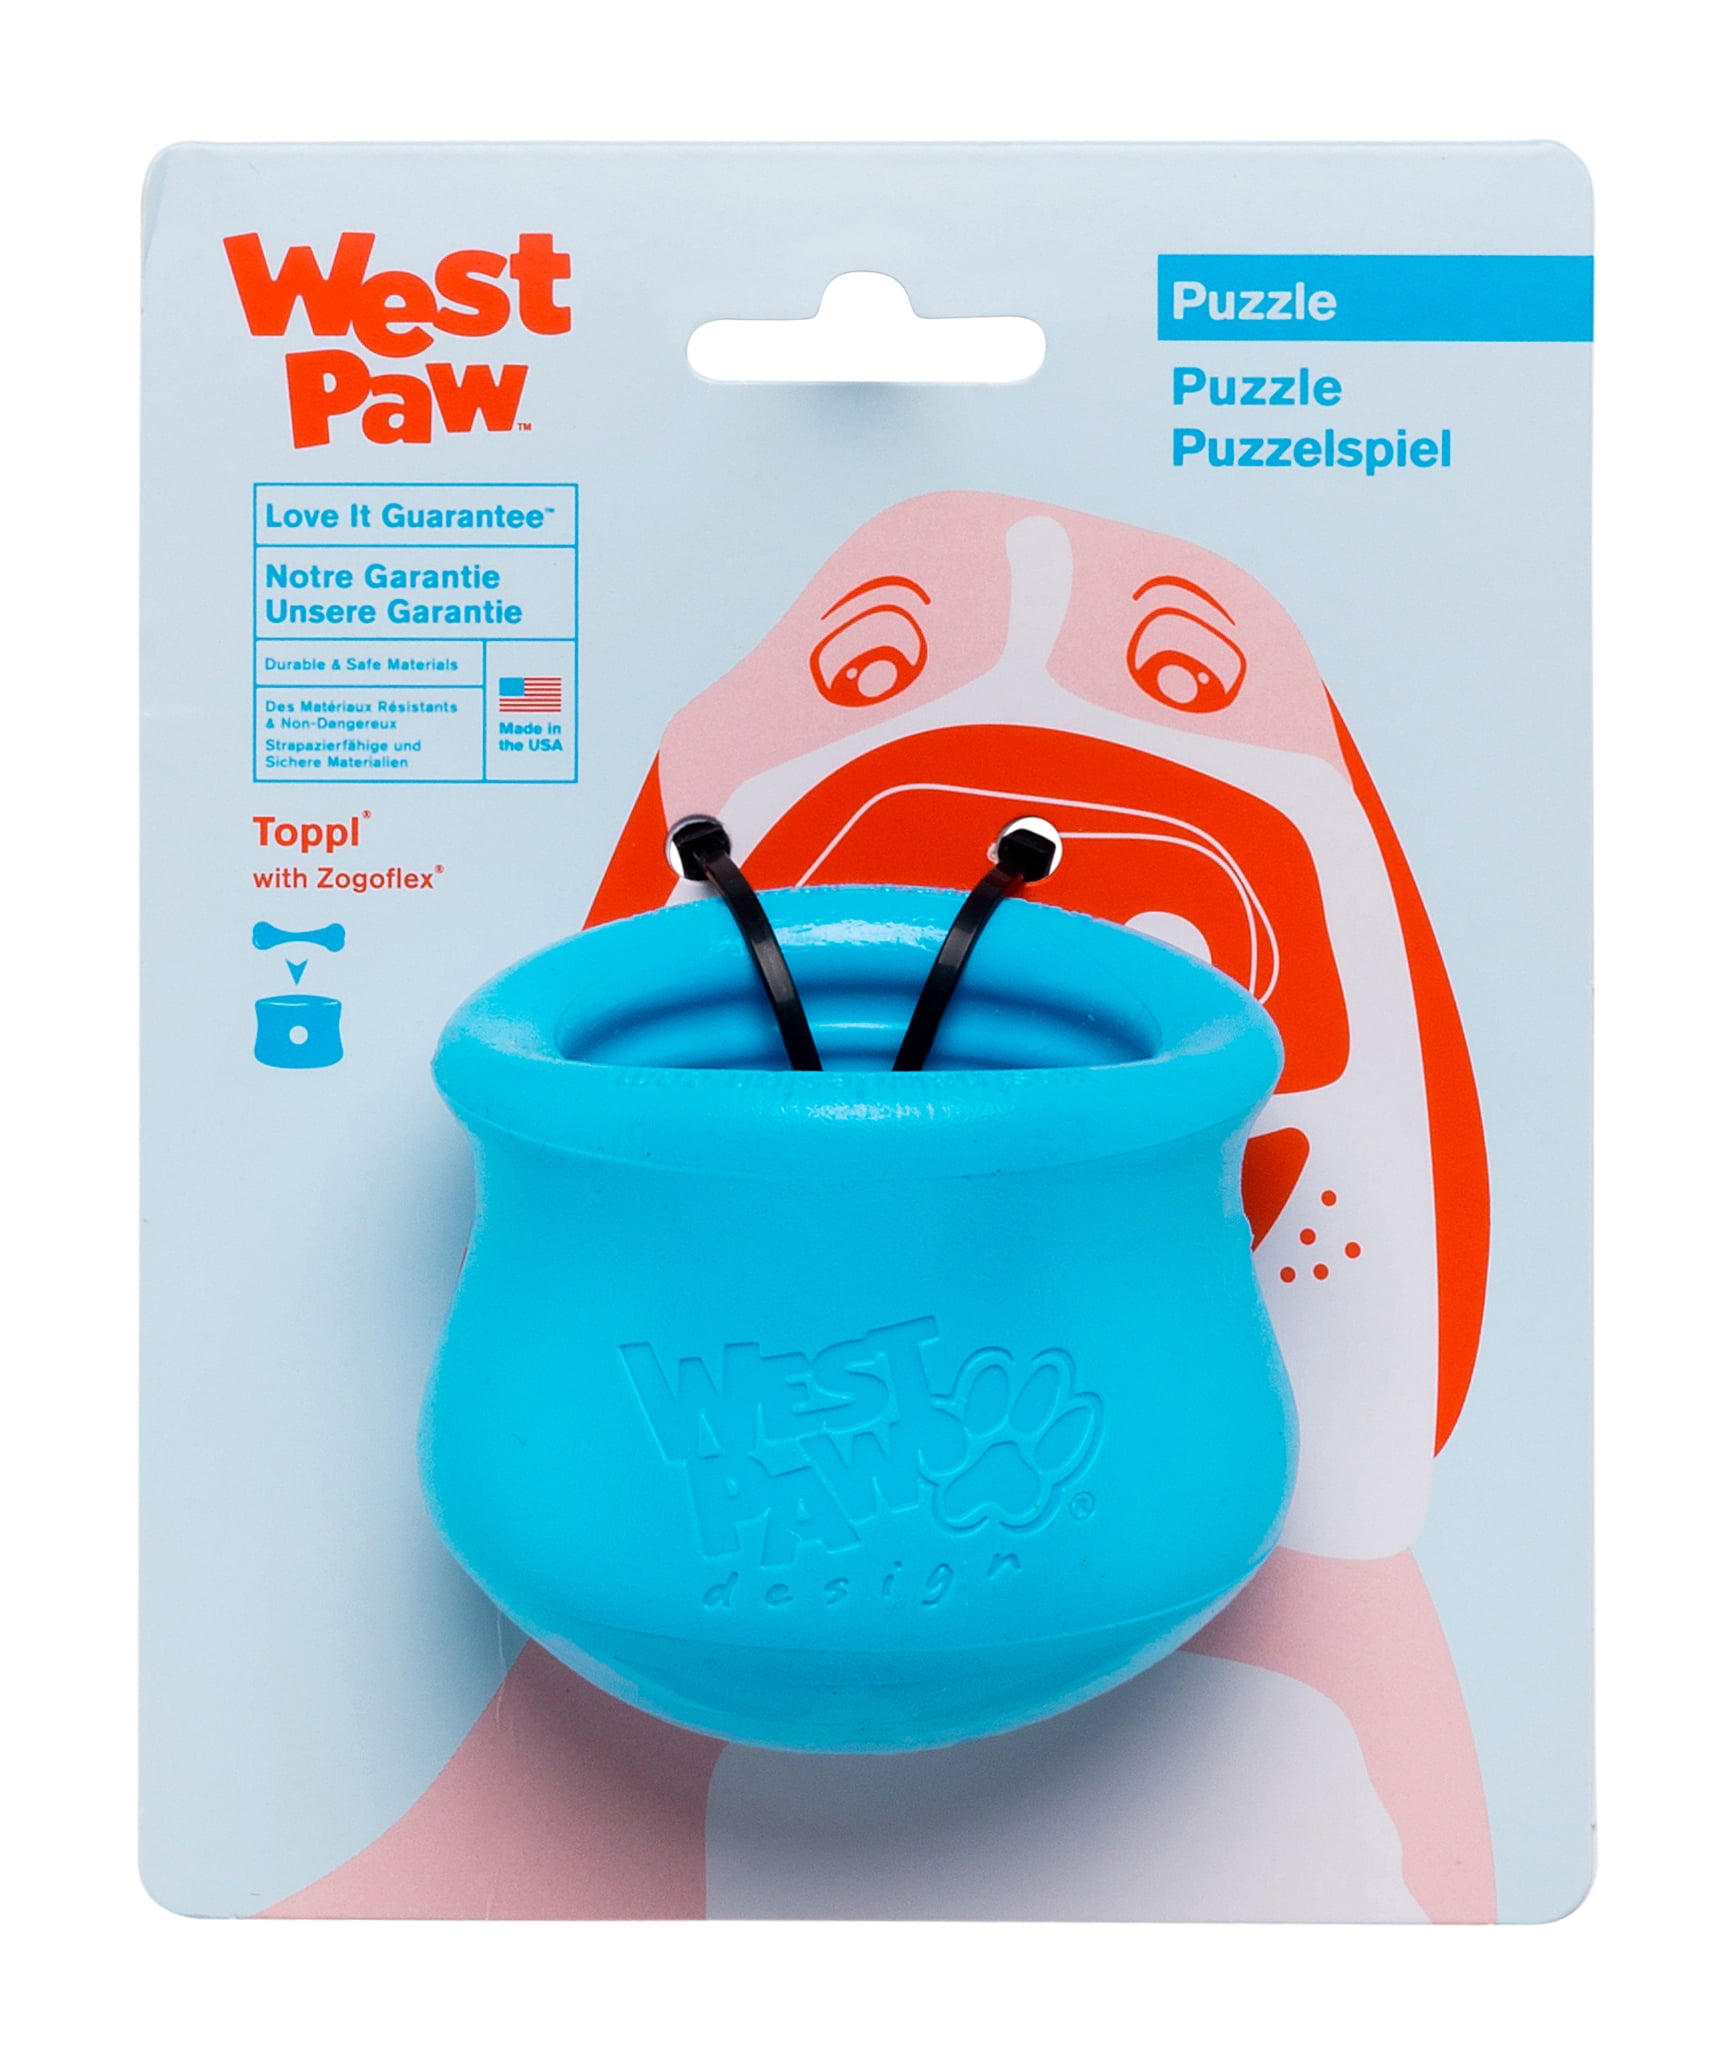 Pet Supplies : WEST PAW Zogoflex Toppl Treat Dispensing Dog Toy Bundle –  Interactive Chew Toys for Dogs – Dog Toy for Moderate Chewers, Fetch, Catch  – Holds Kibble, Treats, Small 3